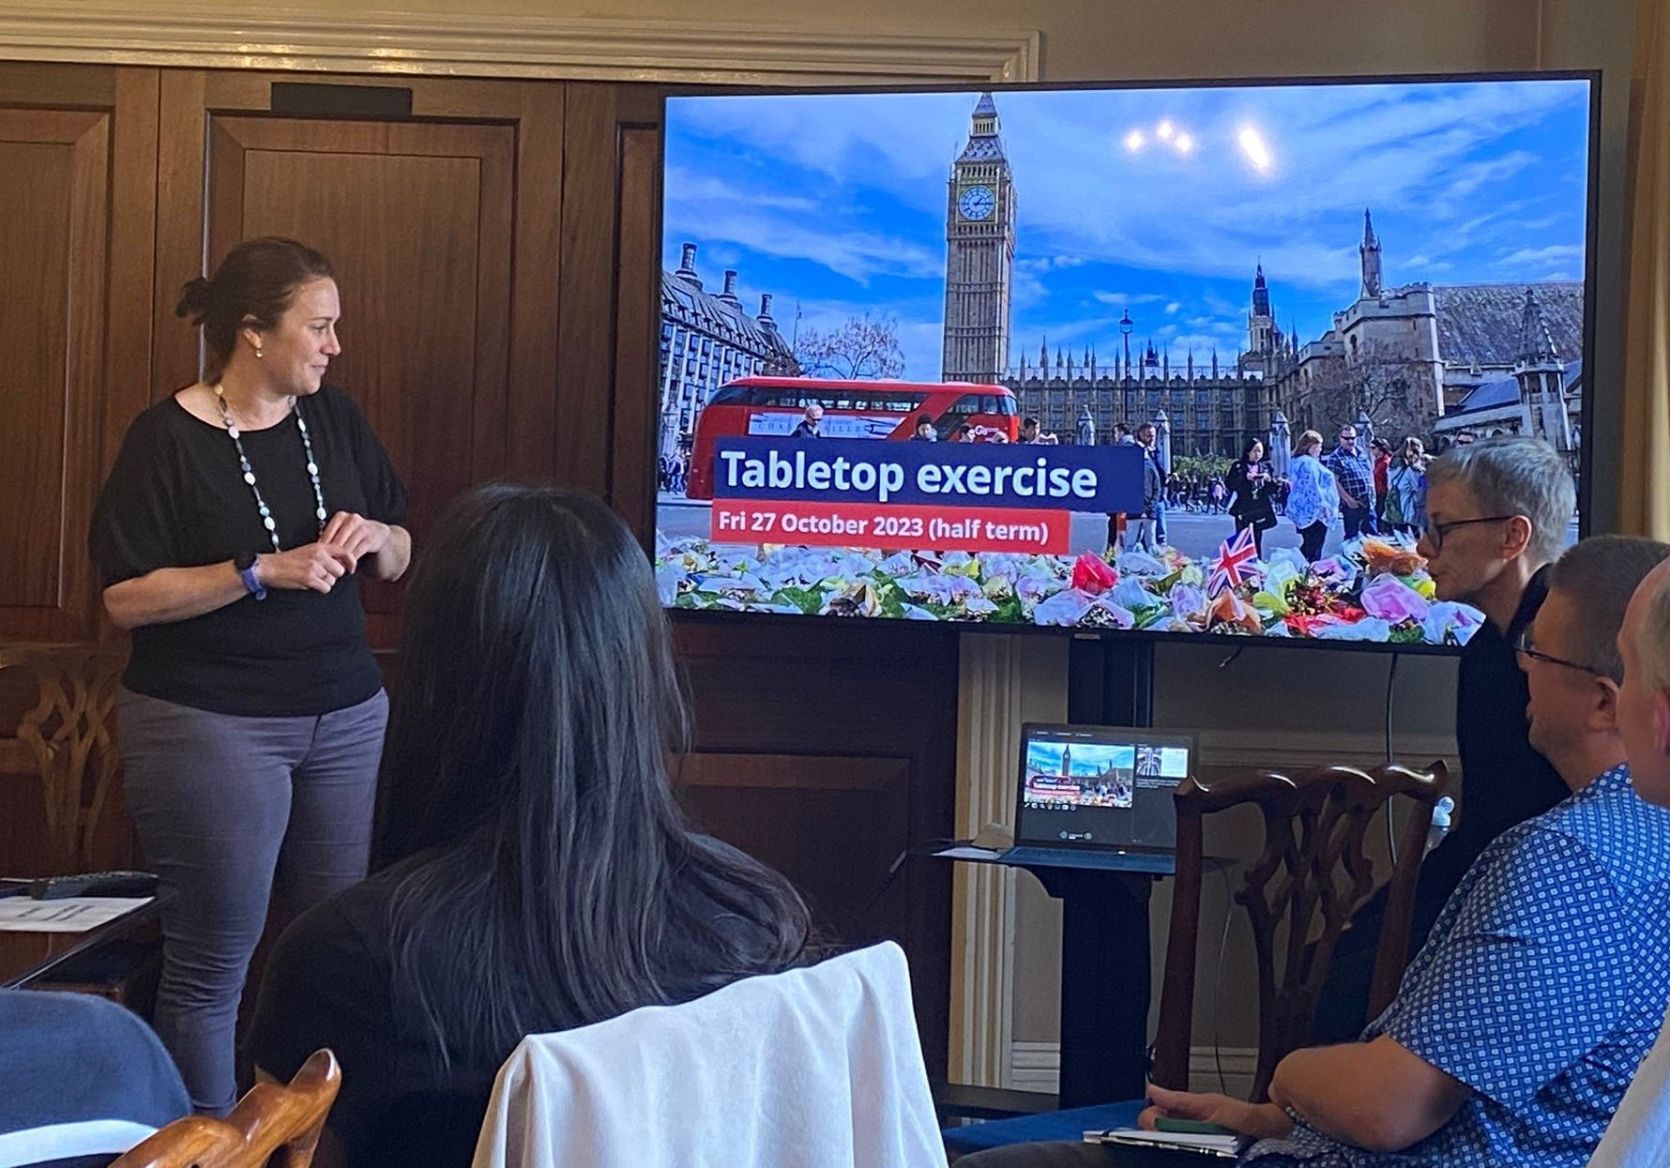 Helen Killingley from The National Emergencies Trust is presenting to a meeting. In the background can be seen four members of the audience (viewed from behind) and on the slides is a picture of Parliament Square with Big Ben and a red London bus visible too.